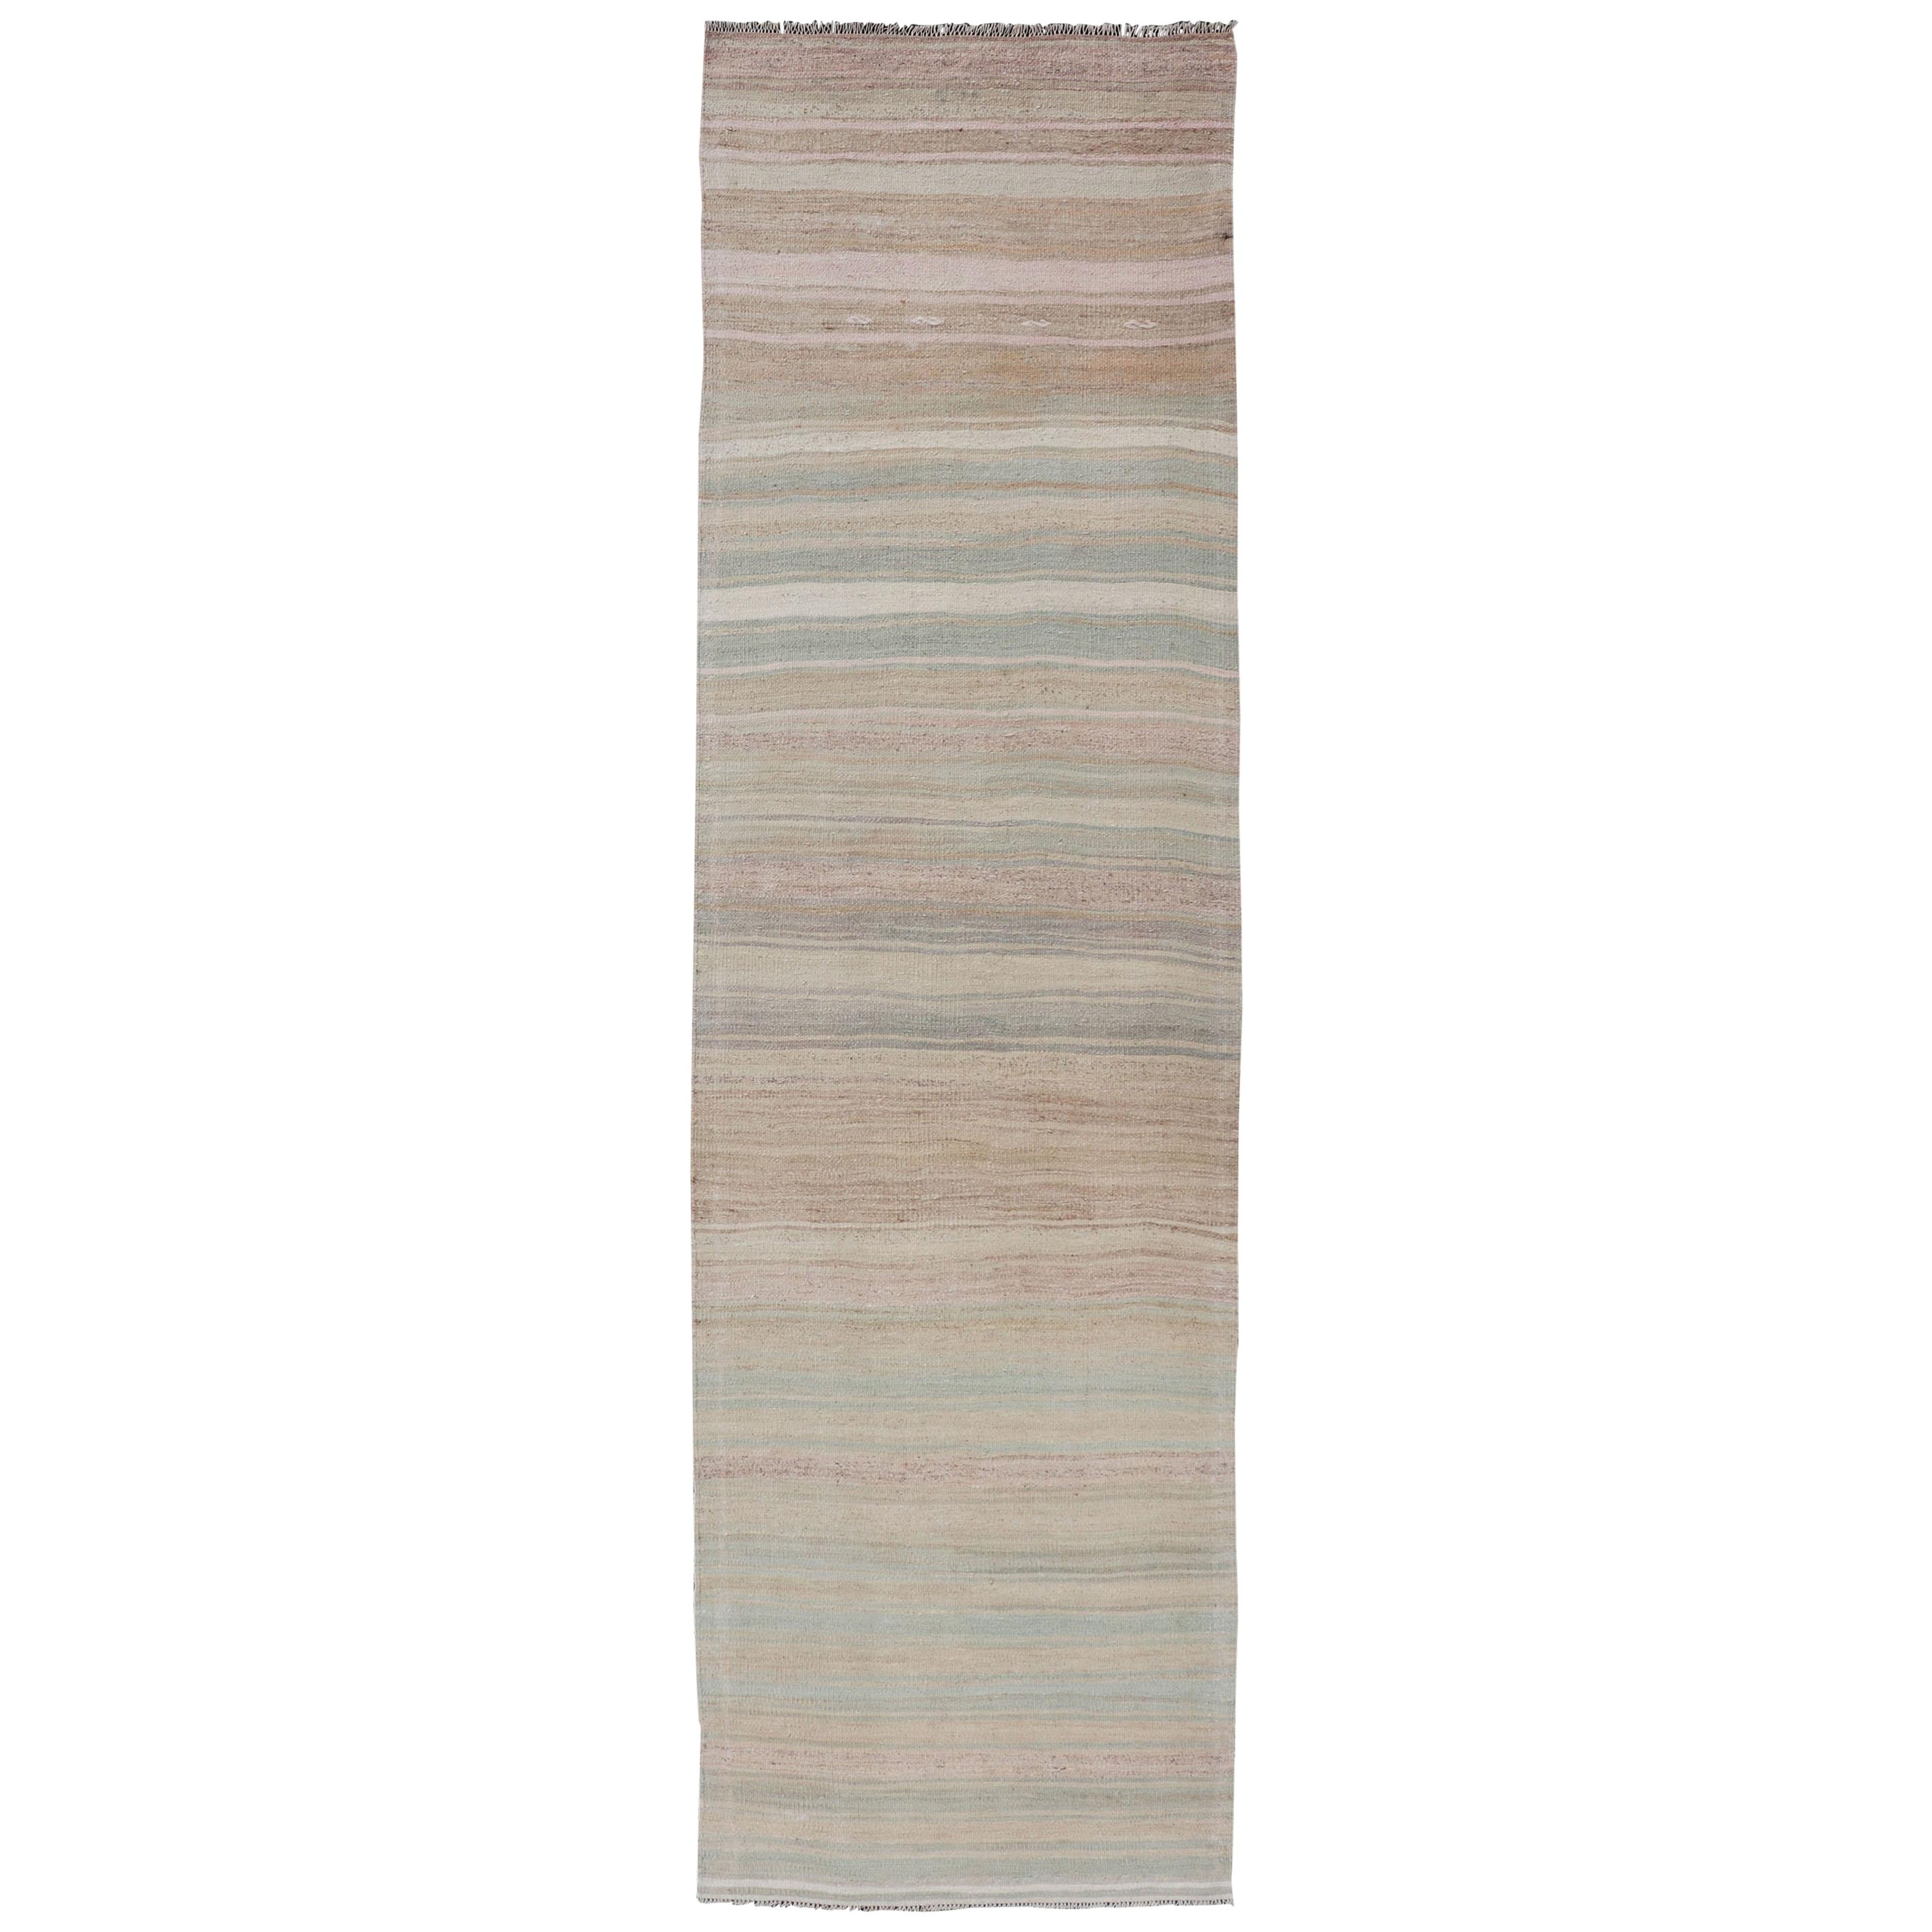 Striped Vintage Turkish Flat-Weave Runner in Light Green, Pink, Tan, and Taupe For Sale